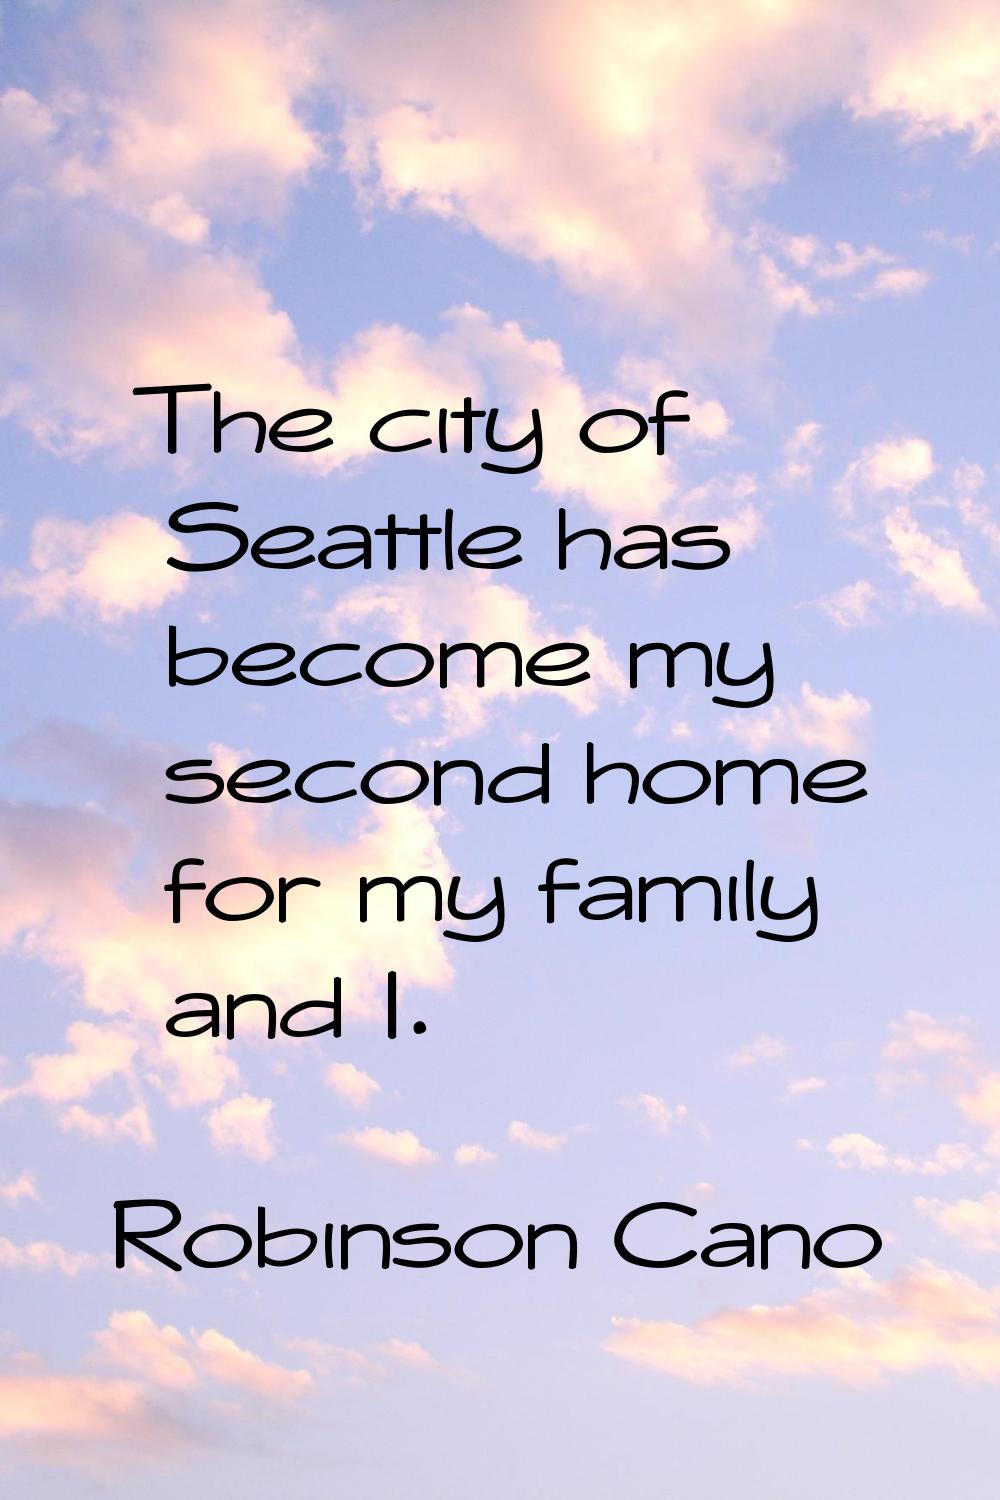 The city of Seattle has become my second home for my family and I.